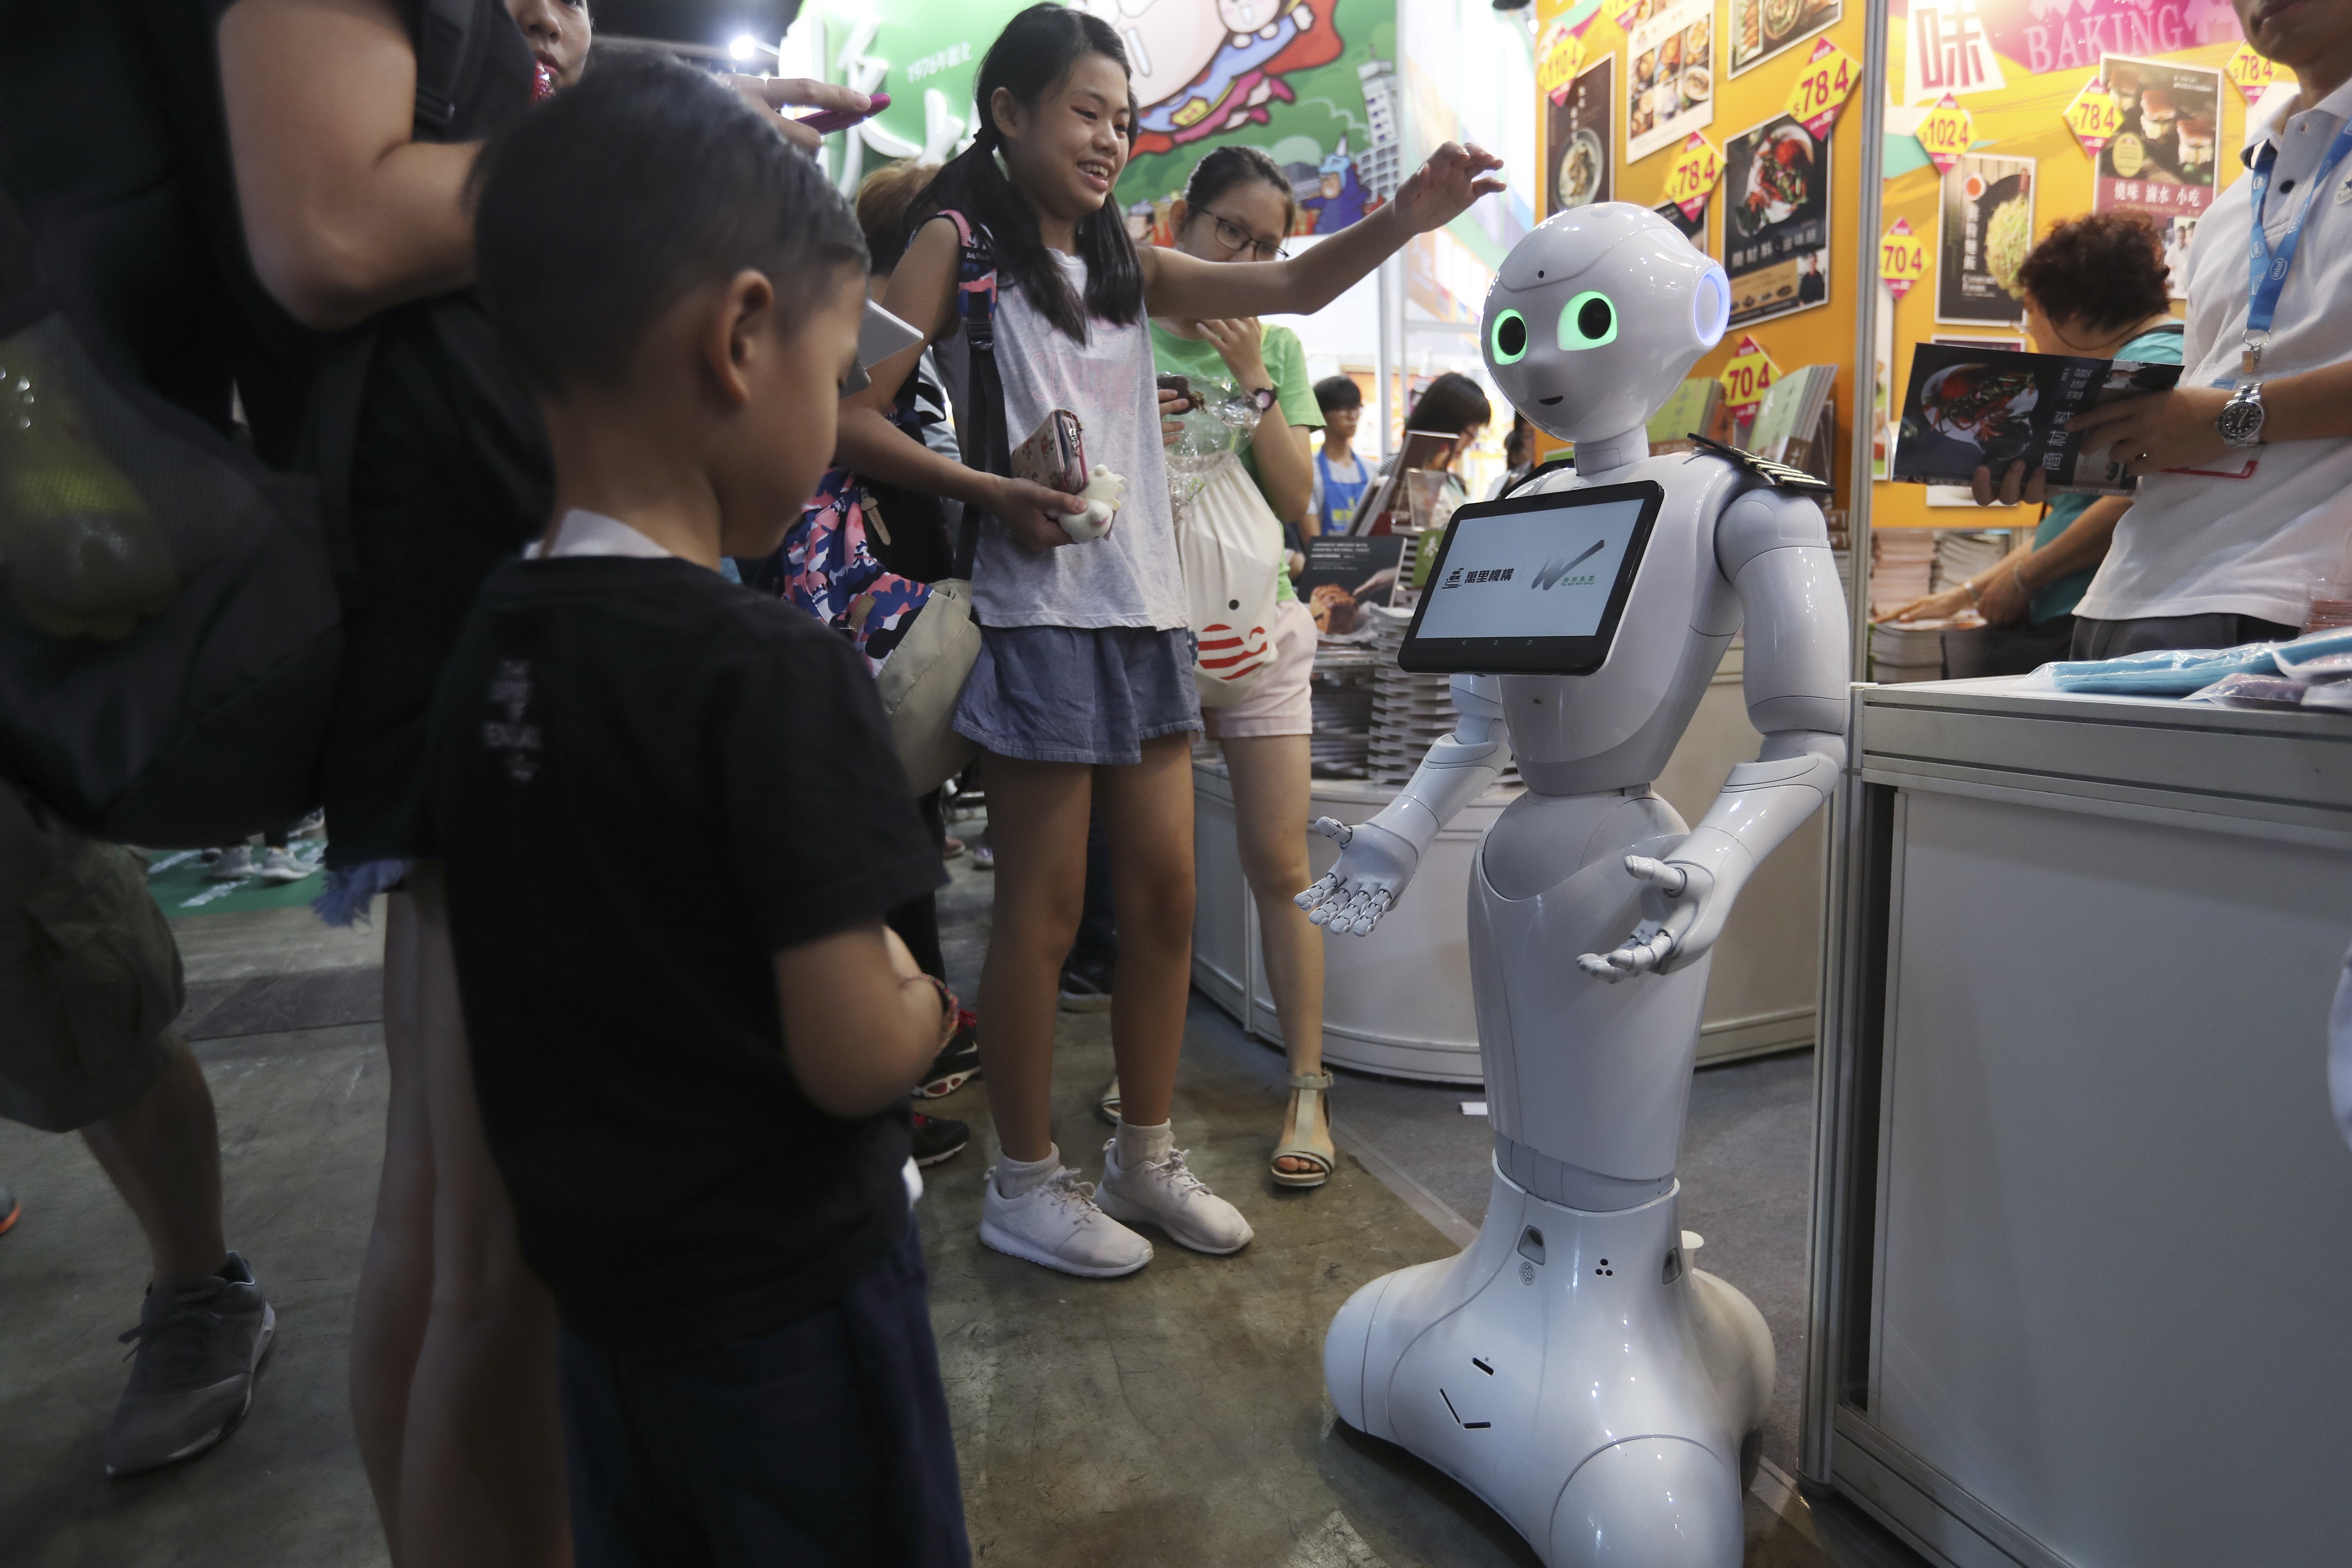 A robot welcomes young visitors to the Hong Kong Book Fair, at the Convention and Exhibition Centre on July 19. Photo: Nora Tam